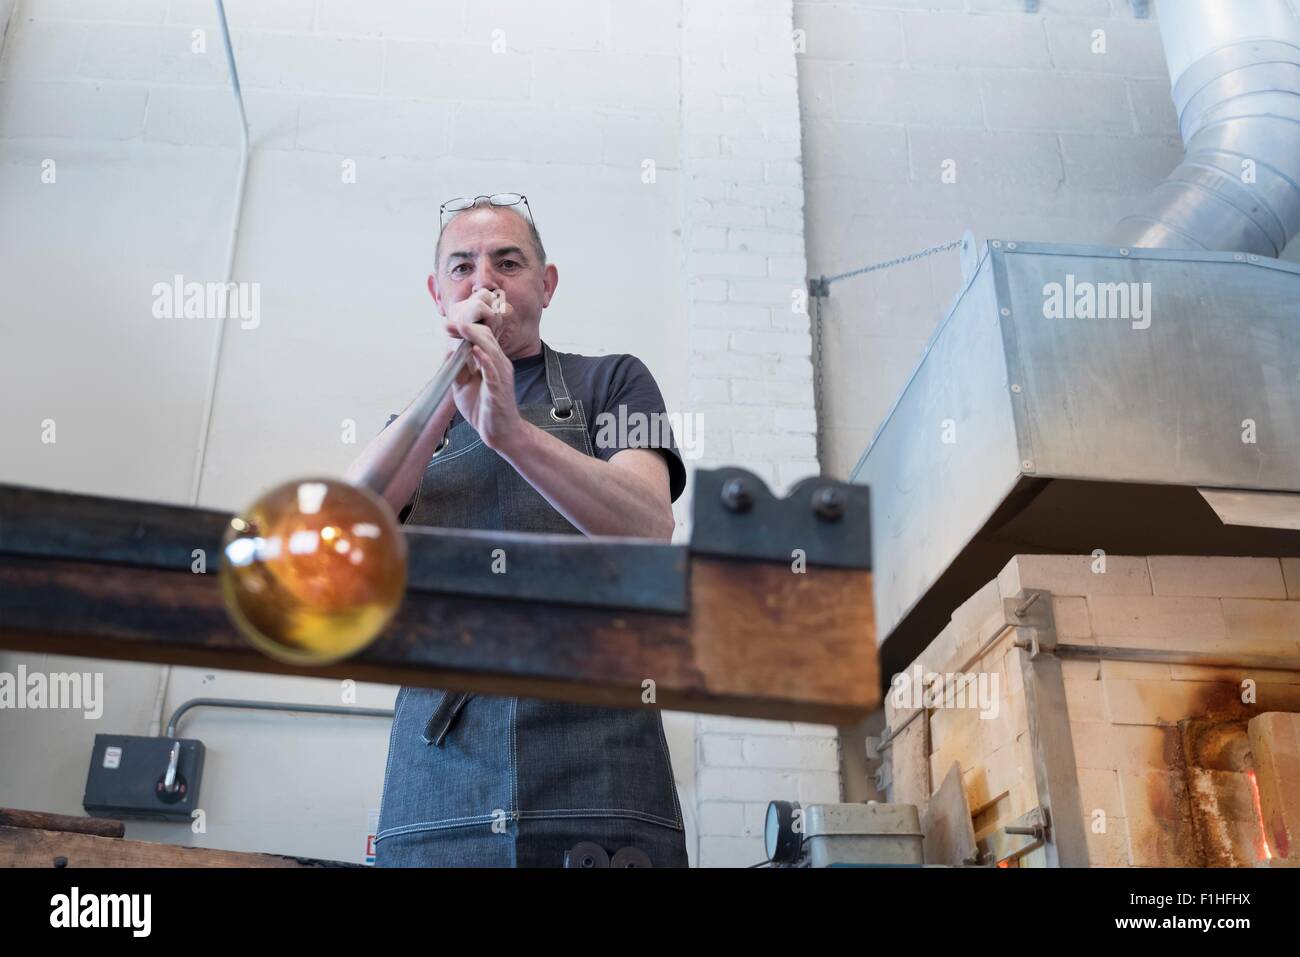 Glassblower blowing hot glass Stock Photo